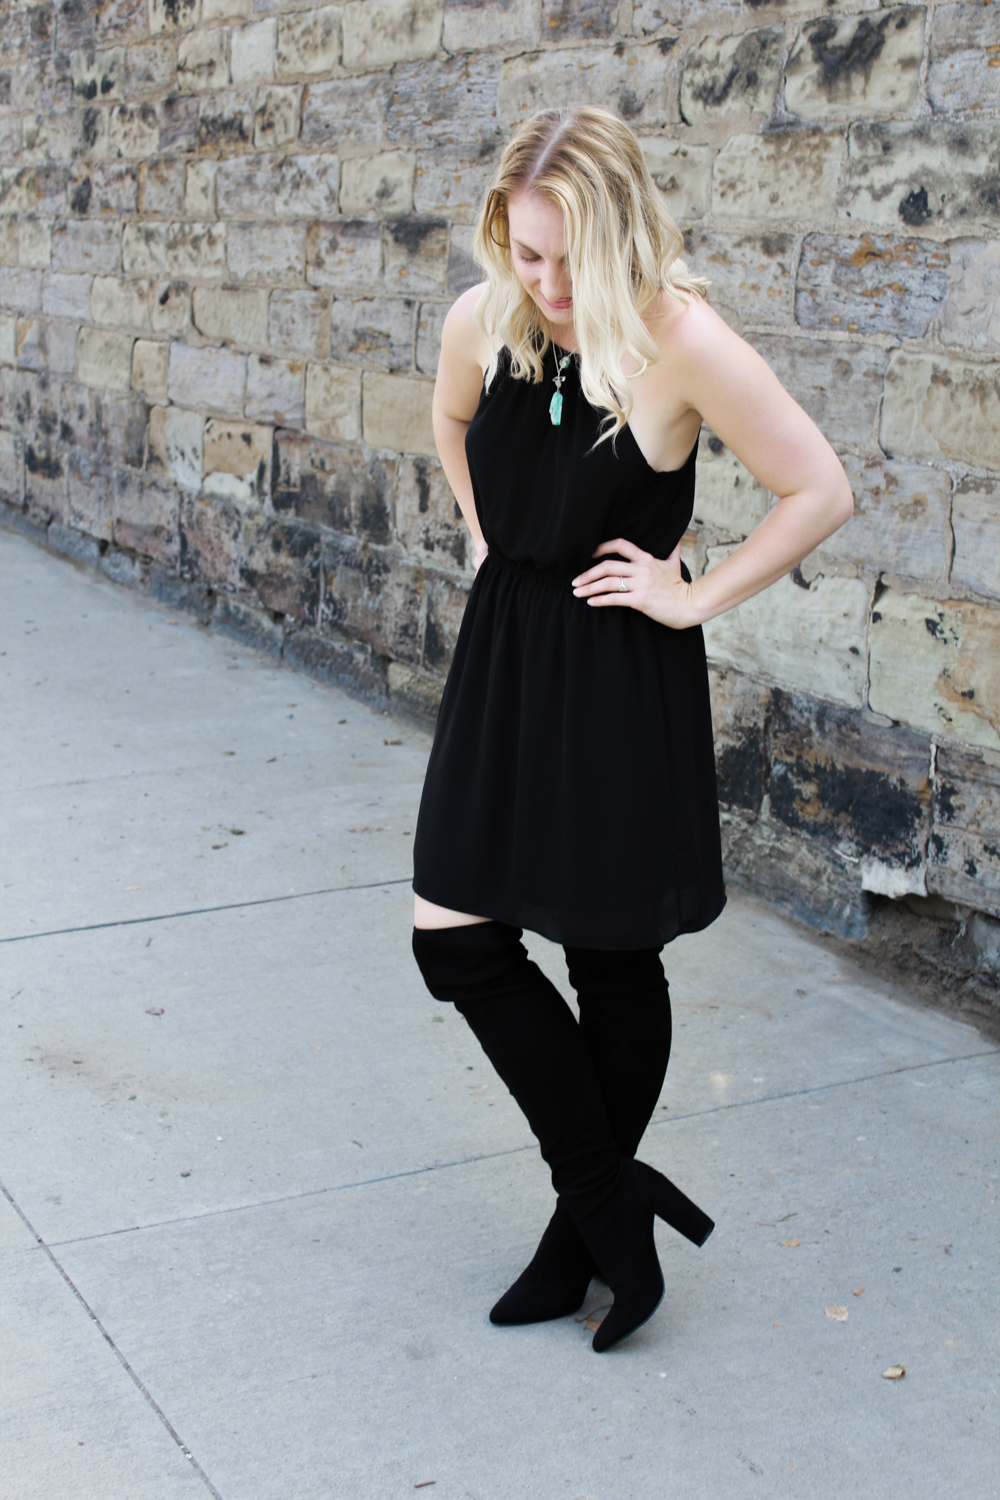 Little black dress outfit with thigh high black boots, Joree & Jane healing crystal necklace